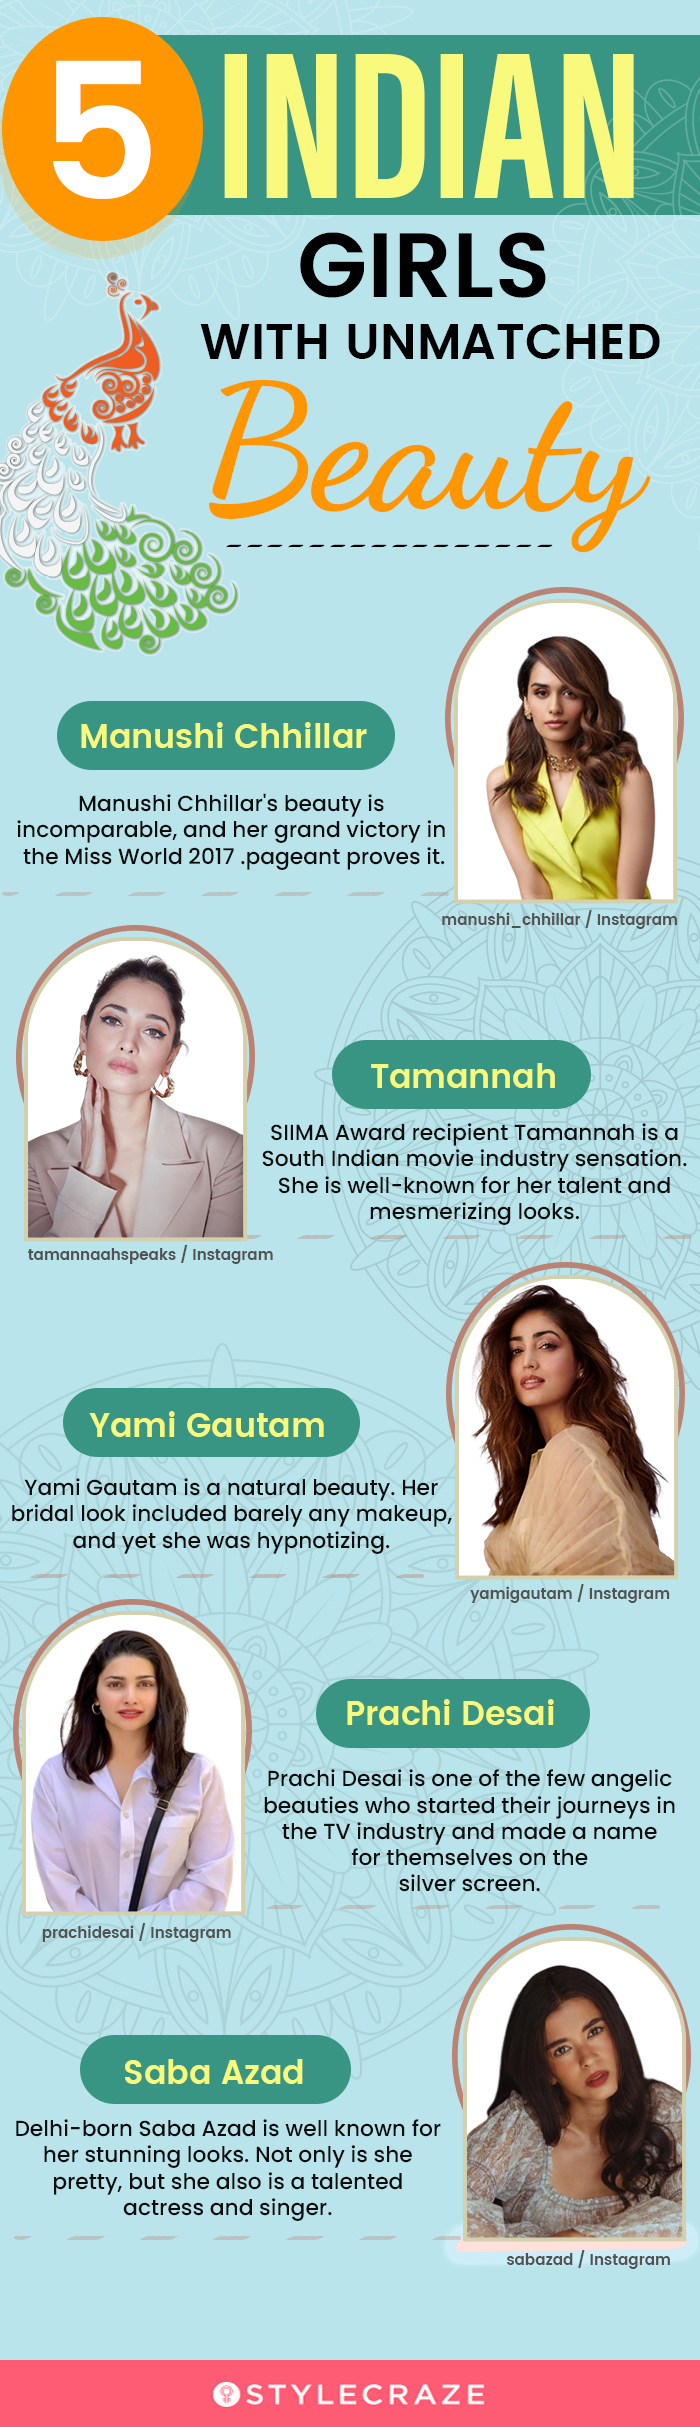 5 indian girls with unmatched beauty [infographic]